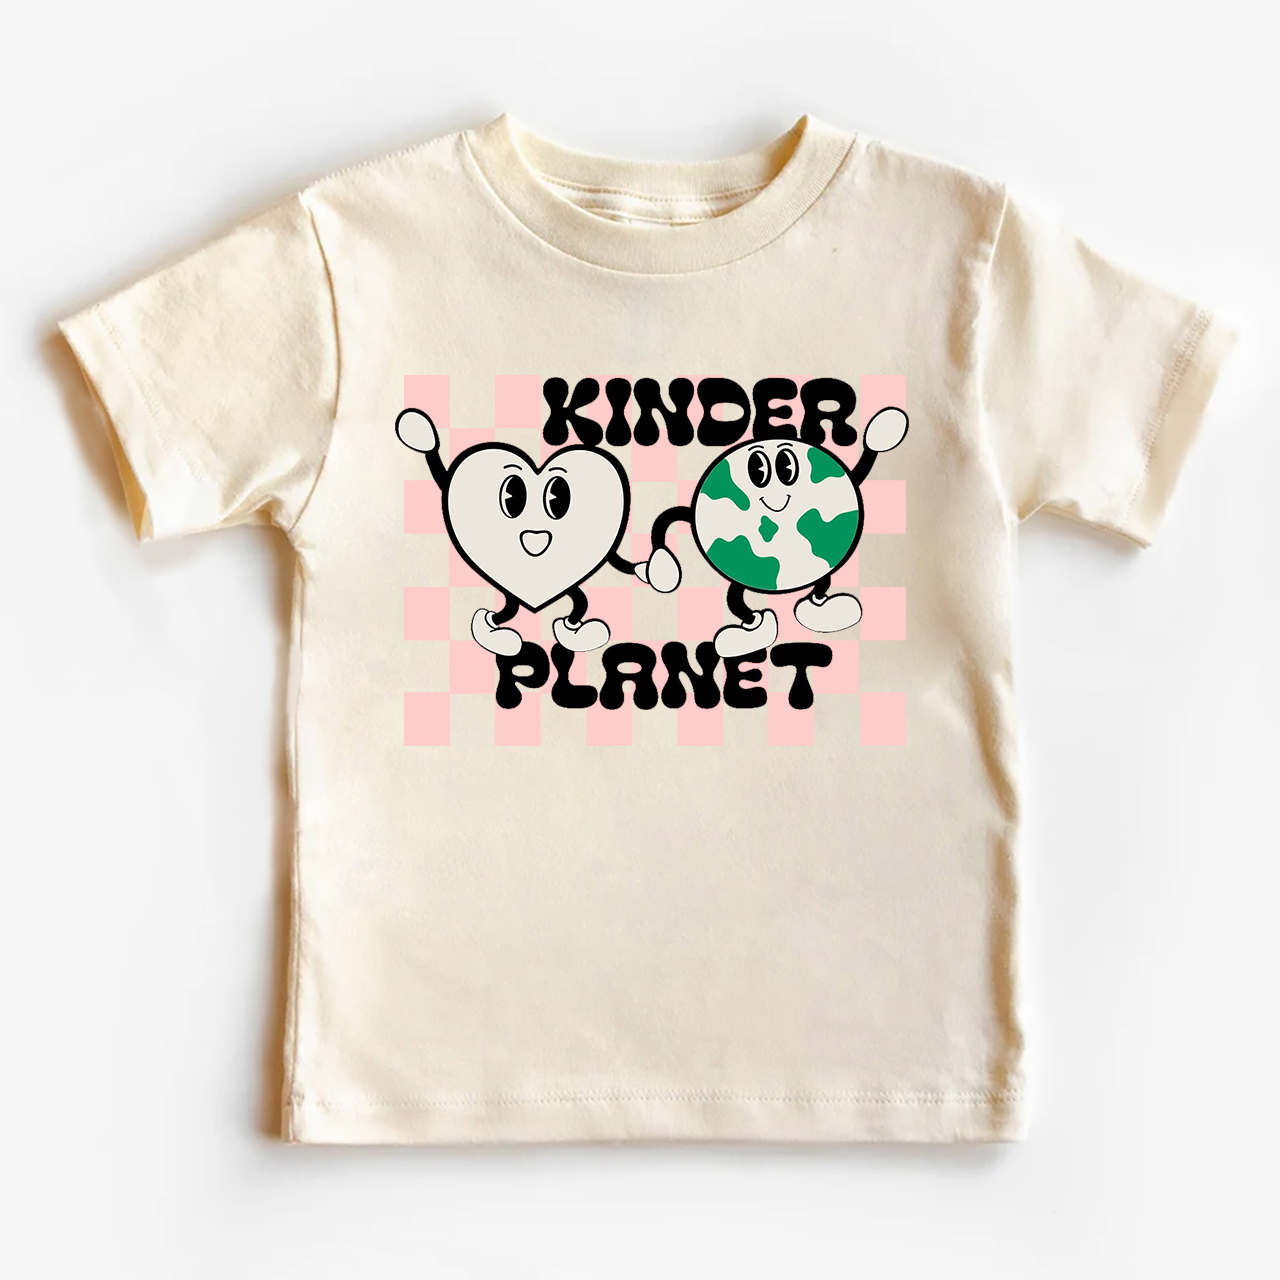 A Kinder Planet Classic Earth Day Kids Shirt